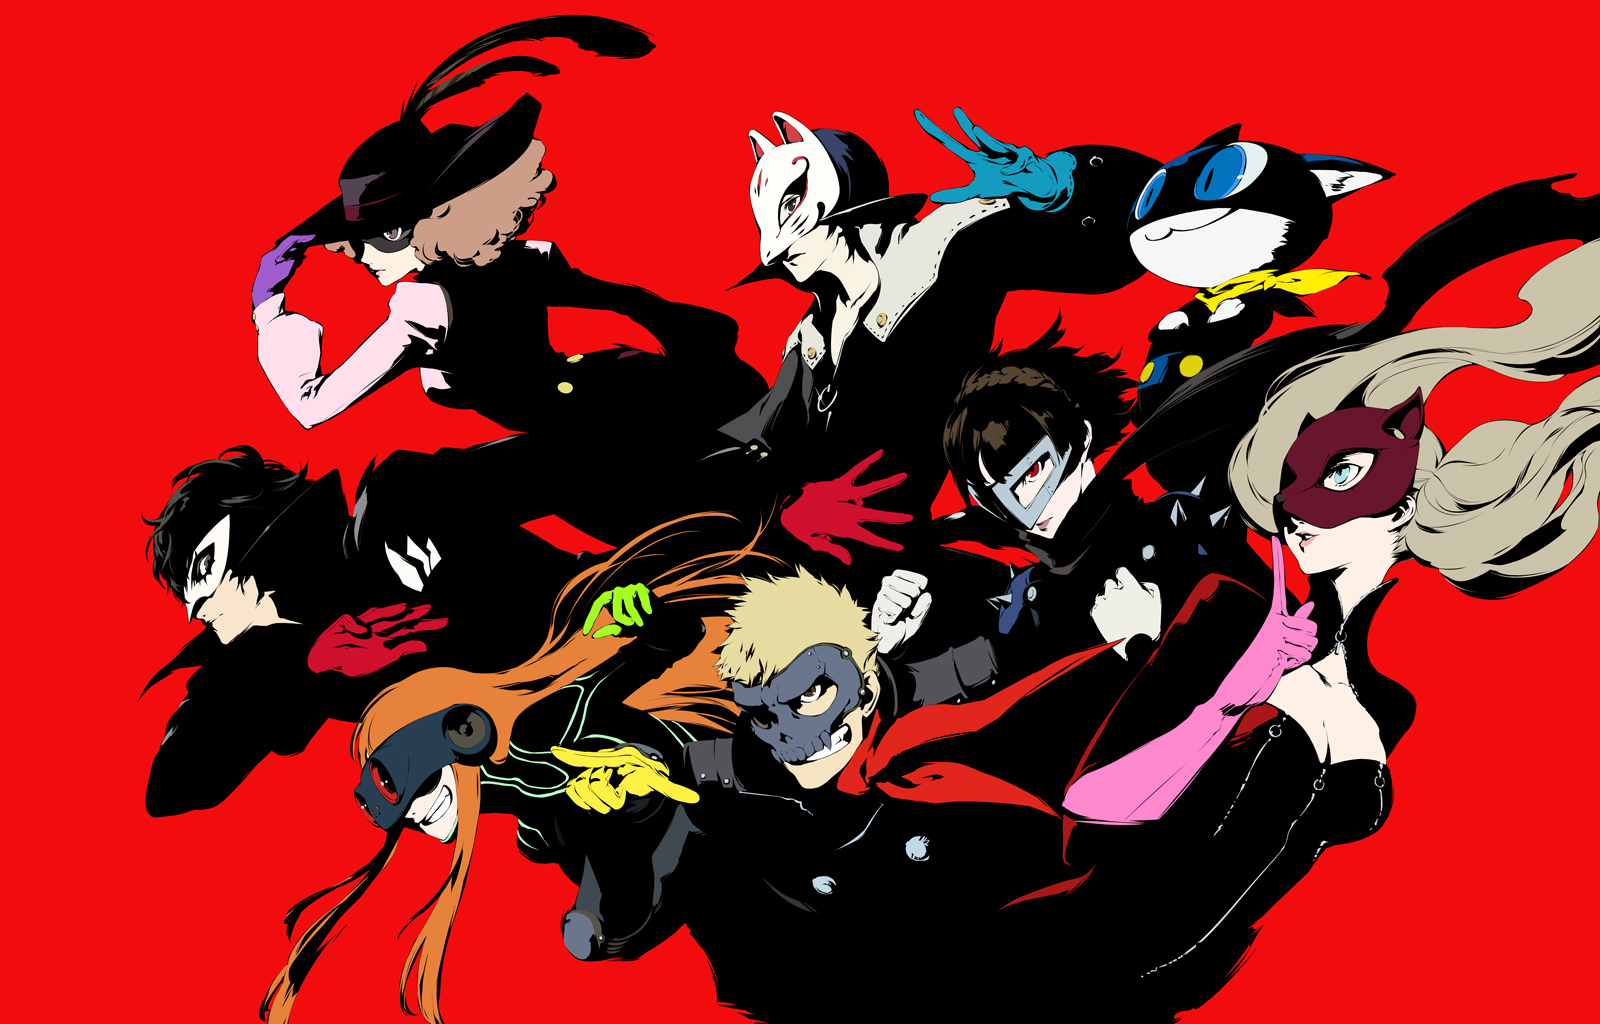 Fine Art: More Art From Persona 5 To Steal Your Heart